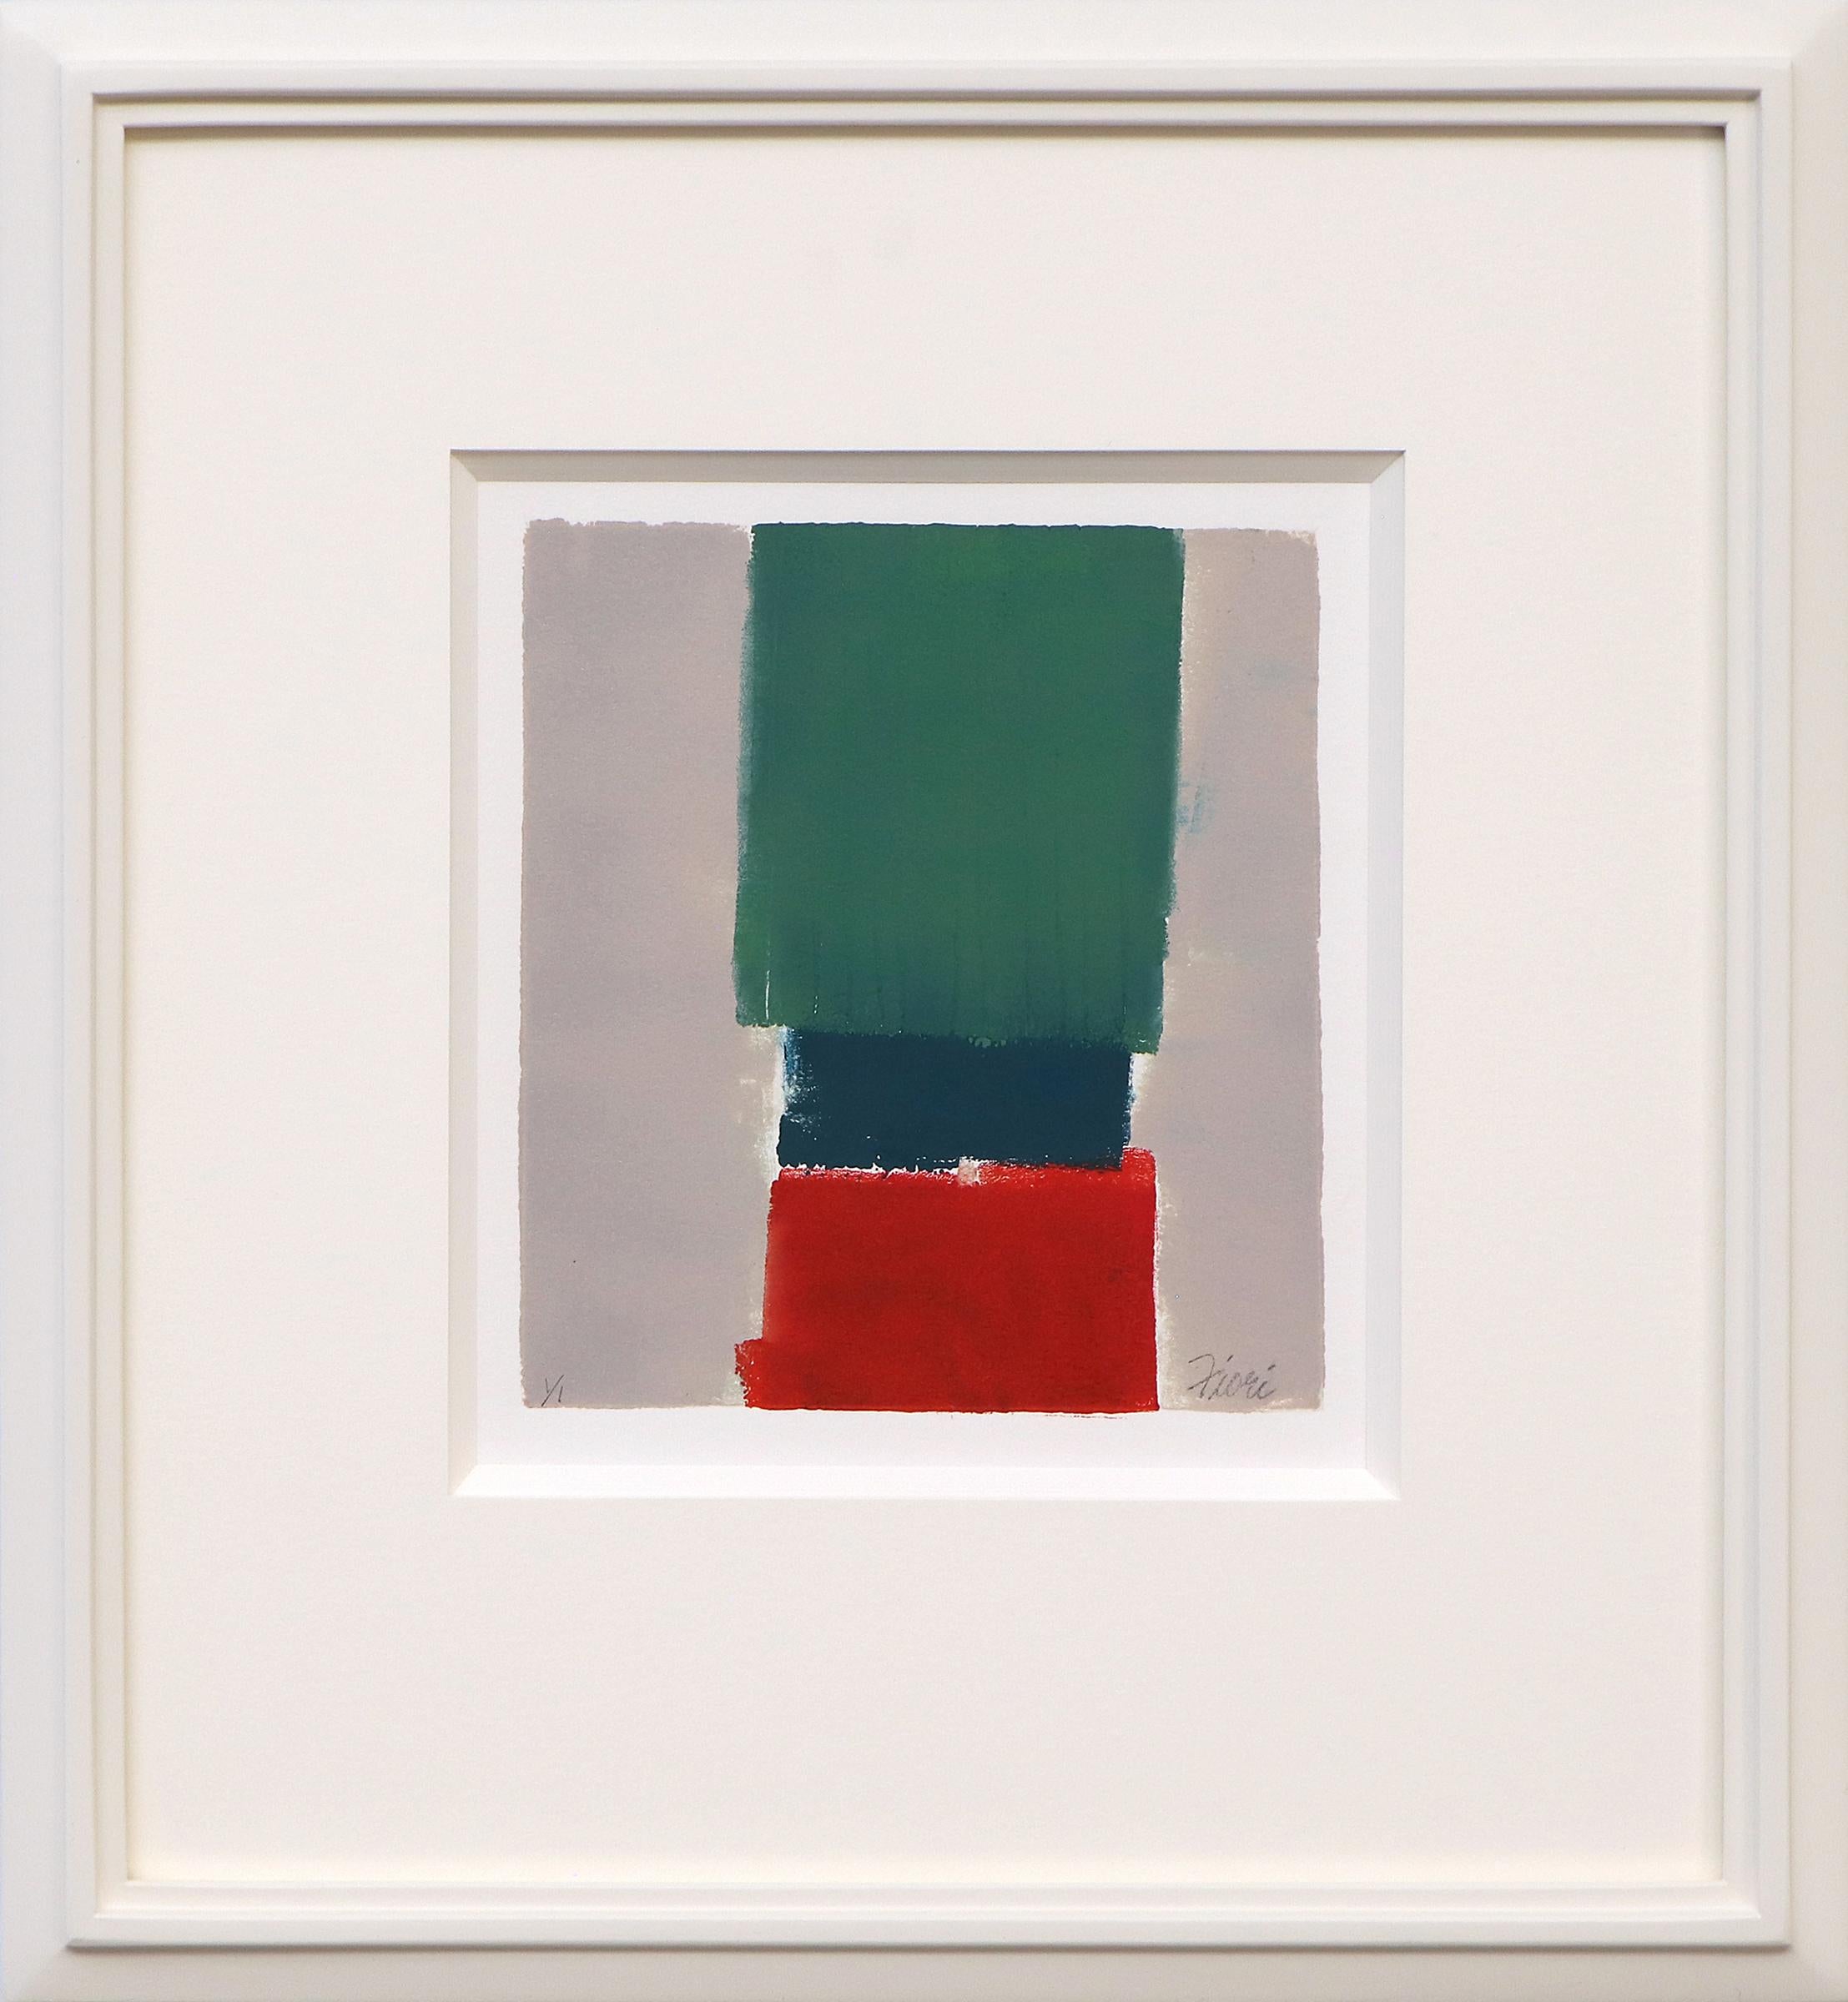 Framed Vintage Abstract Monotype with Rectangles in Gray, Blue, Red, and Green  - Print by Wilma Fiori